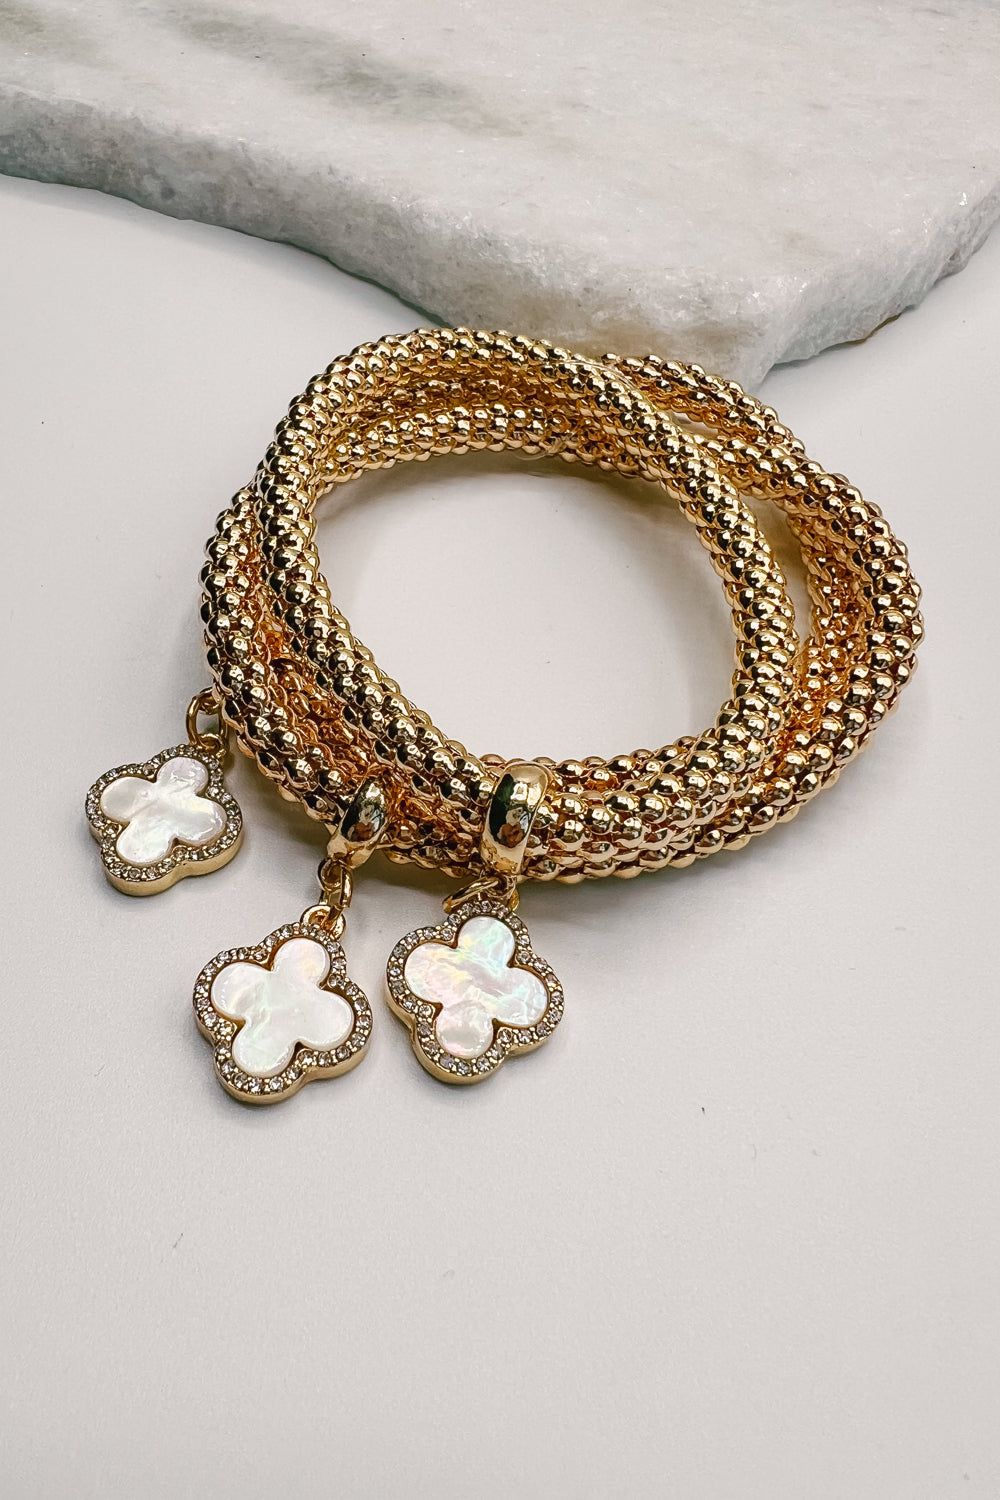 A close-up of the Clove Bracelet Set is shown. The set is made of three gold cobra bracelets with clover charms. 